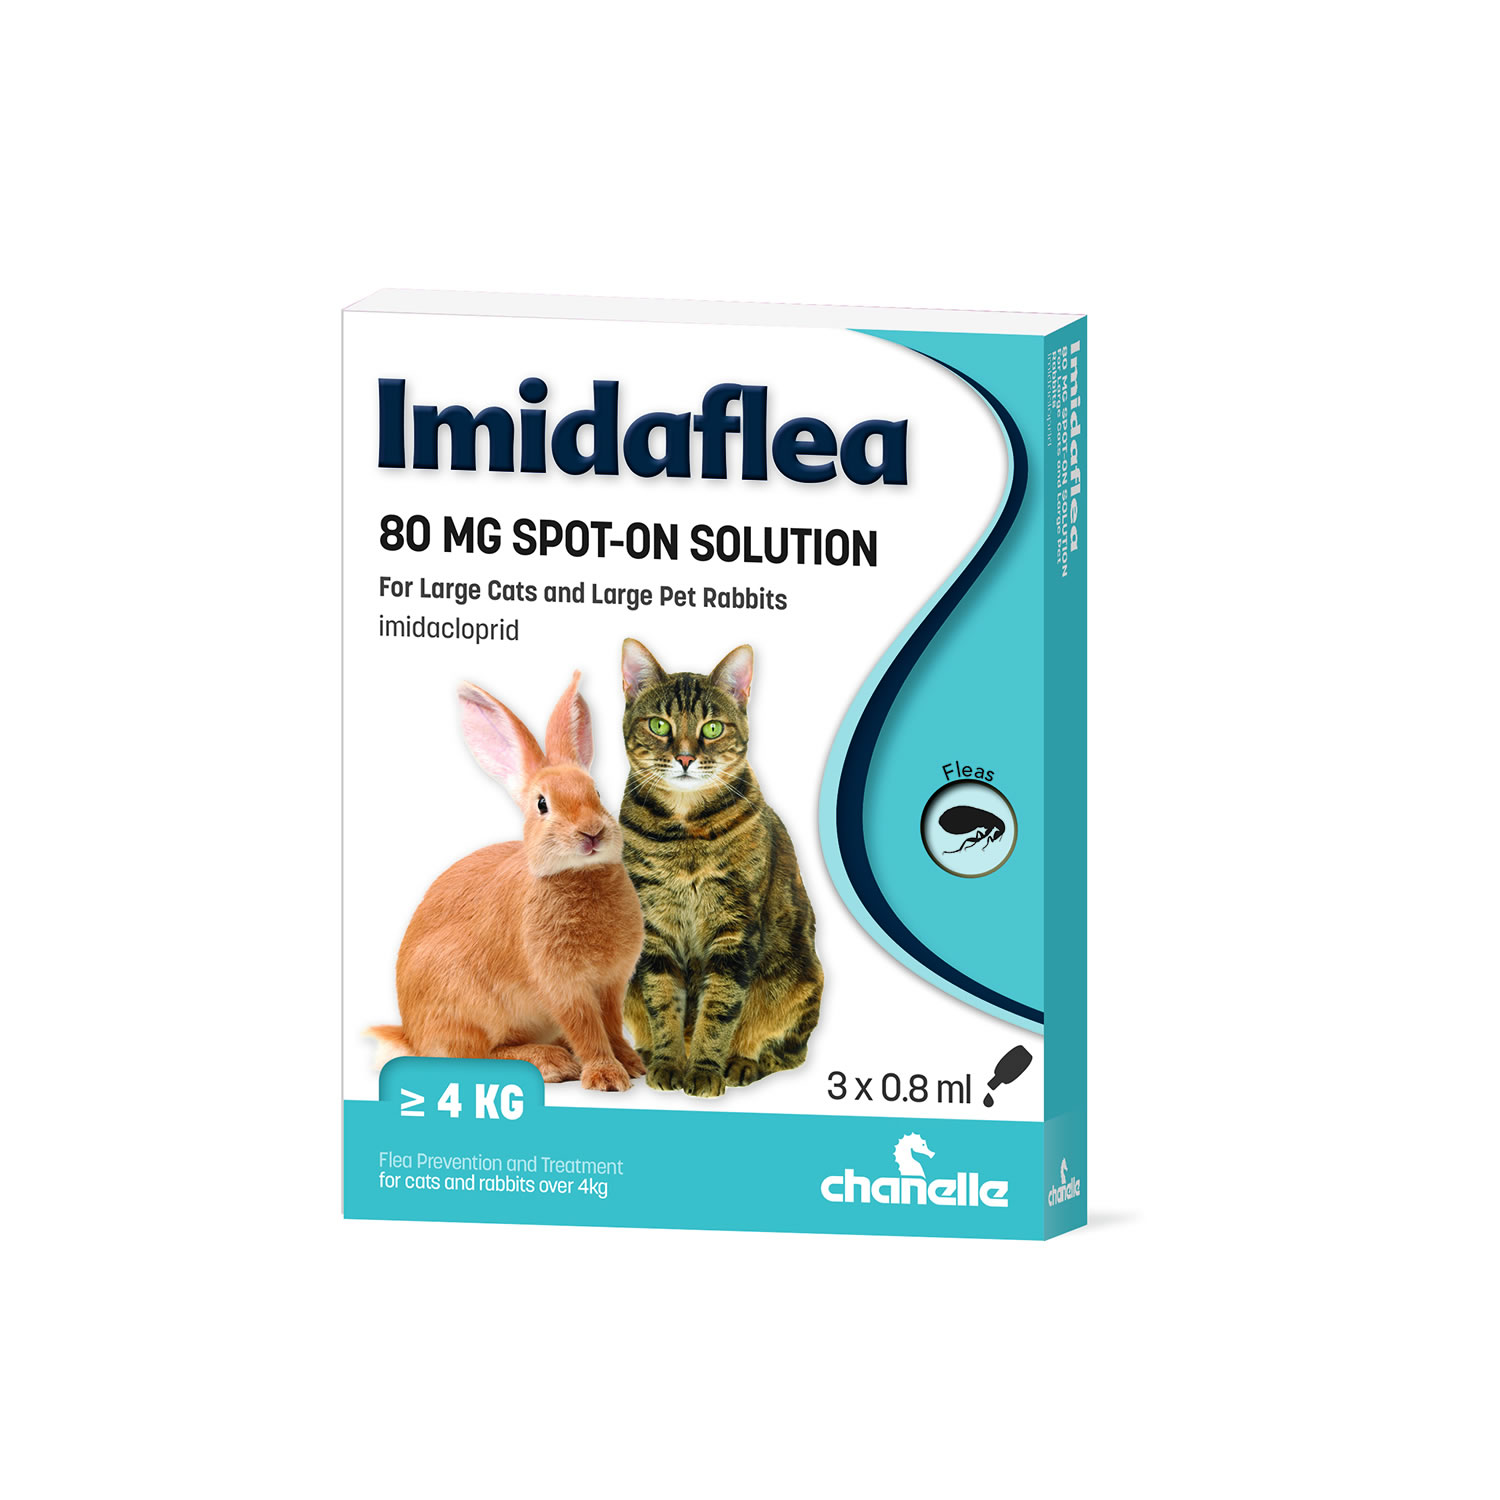 CHANELLE IMIDAFLEA 80GM SPOT-ON FOR LARGE CATS/RABBITS 3 PIPETTES OVER 4 KG - 3 PIPETTES